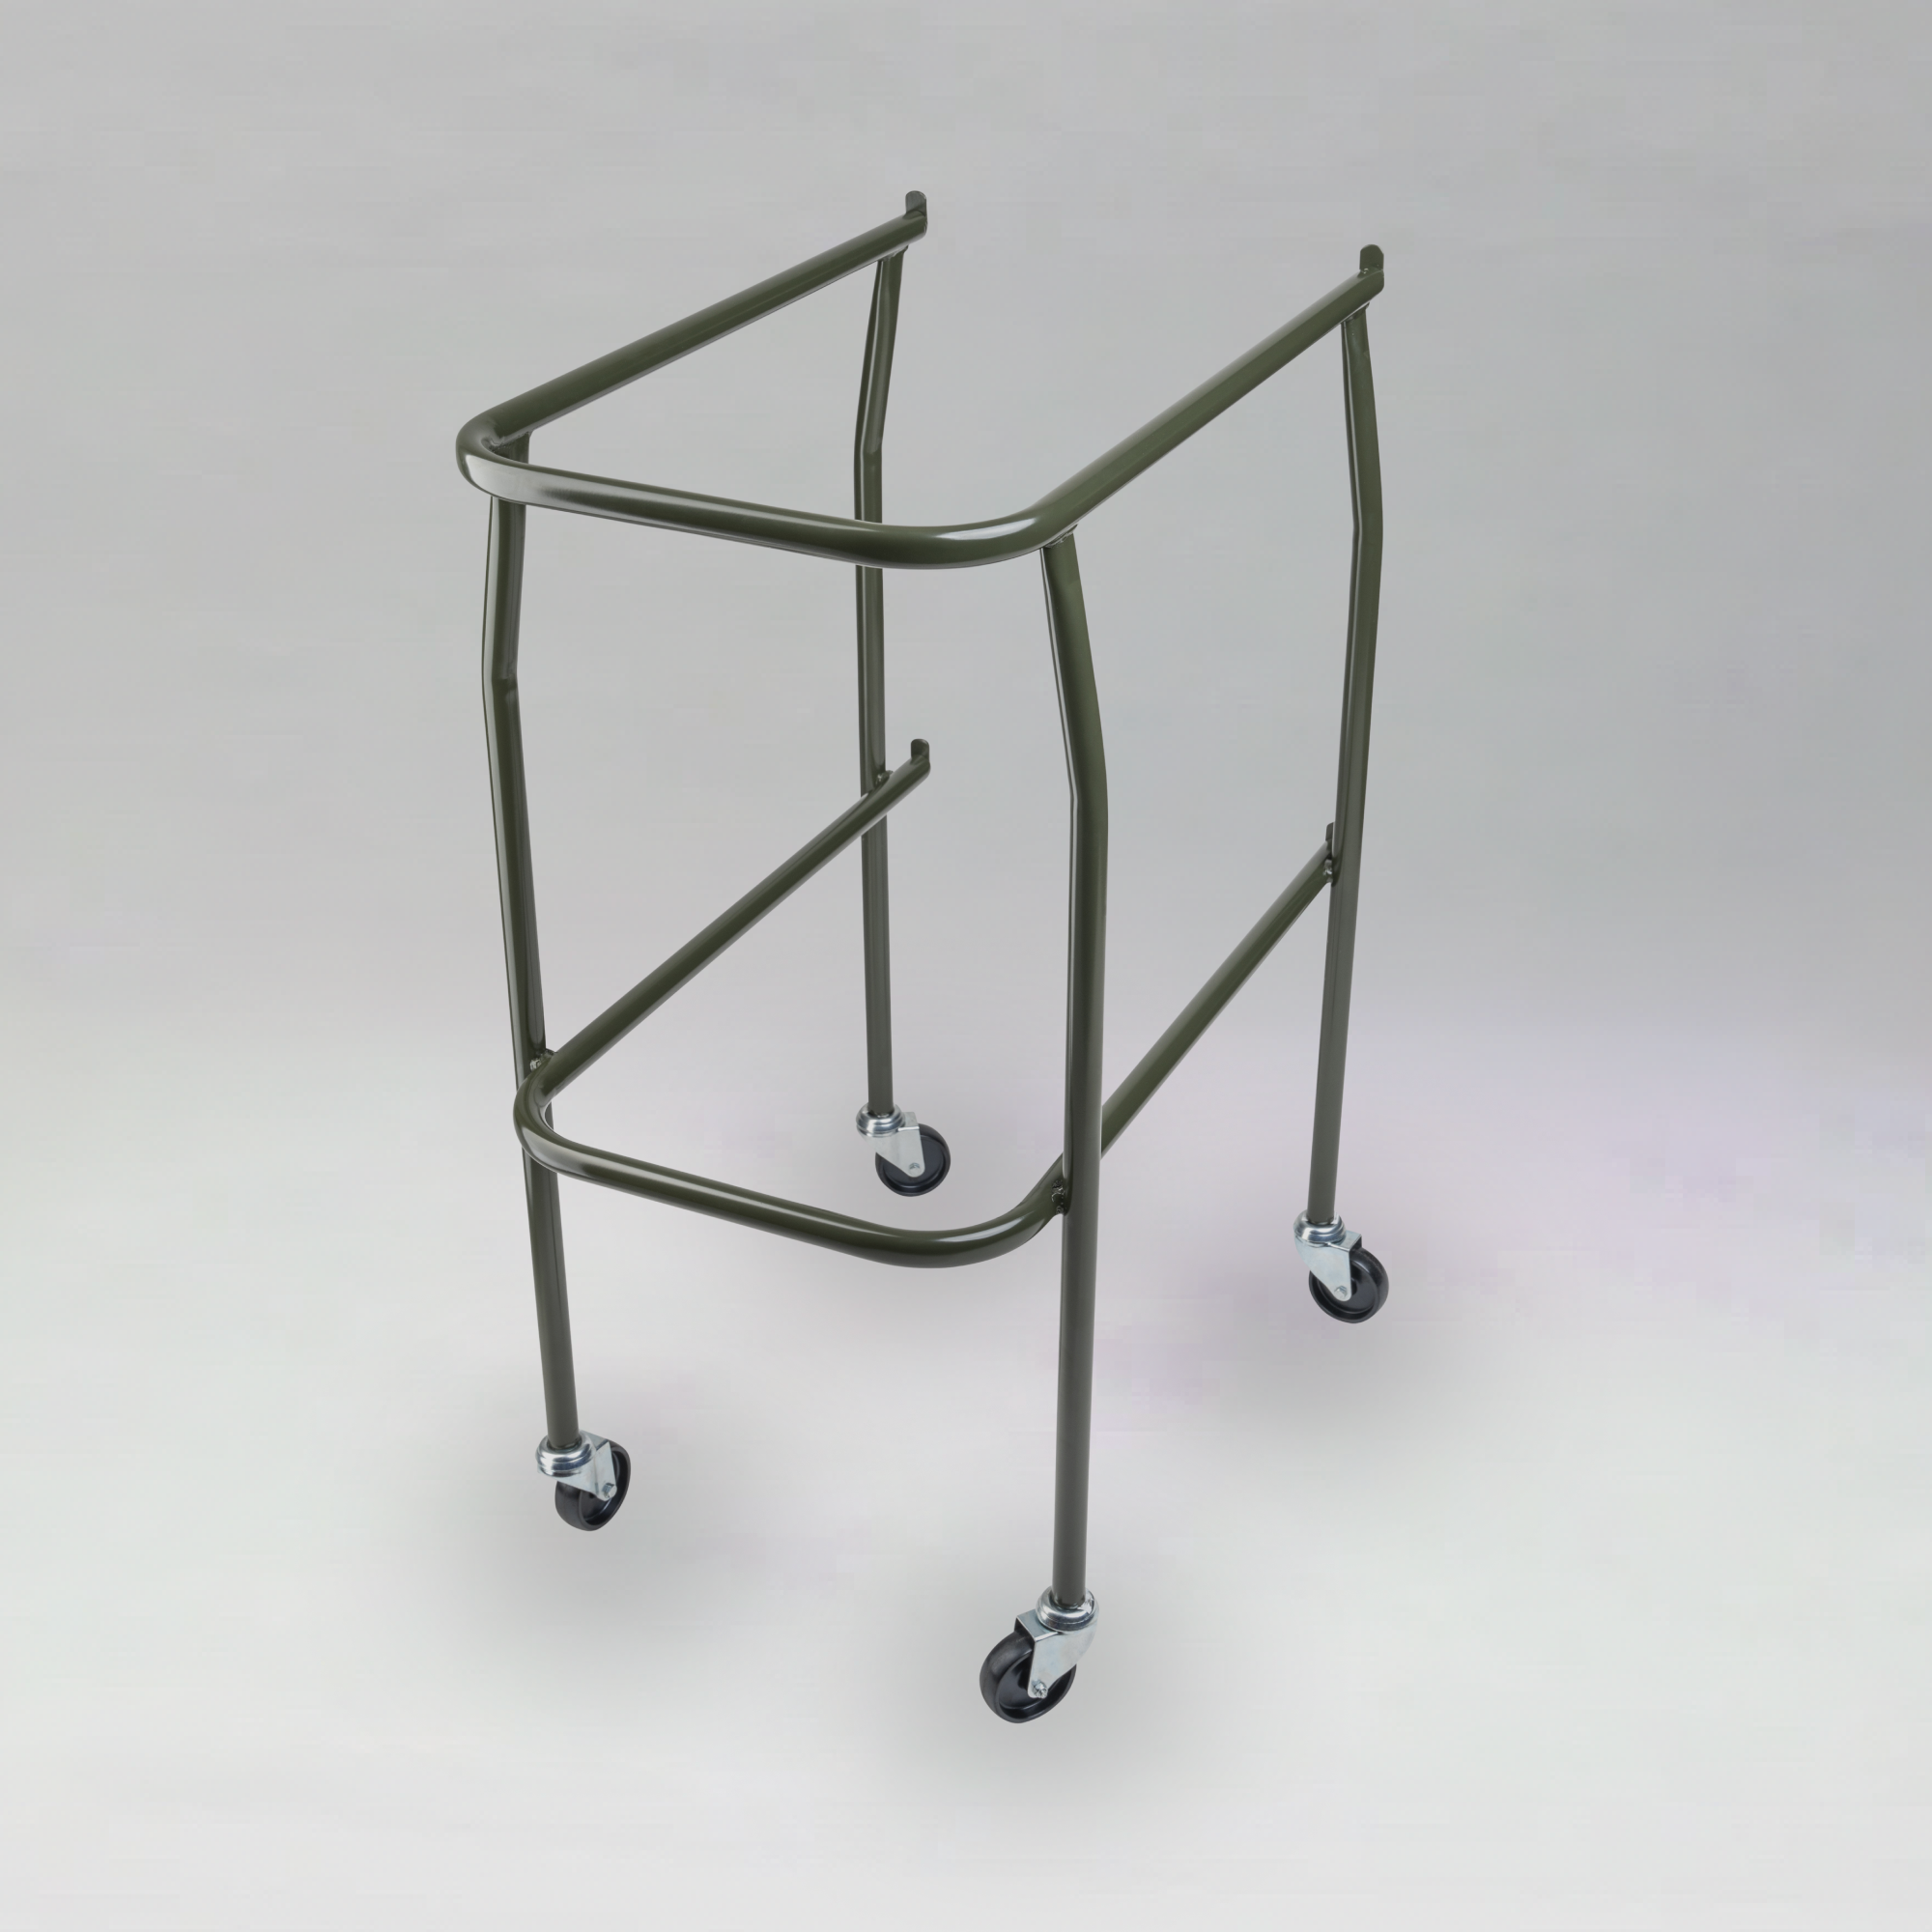 2 Tier Picking Trolley